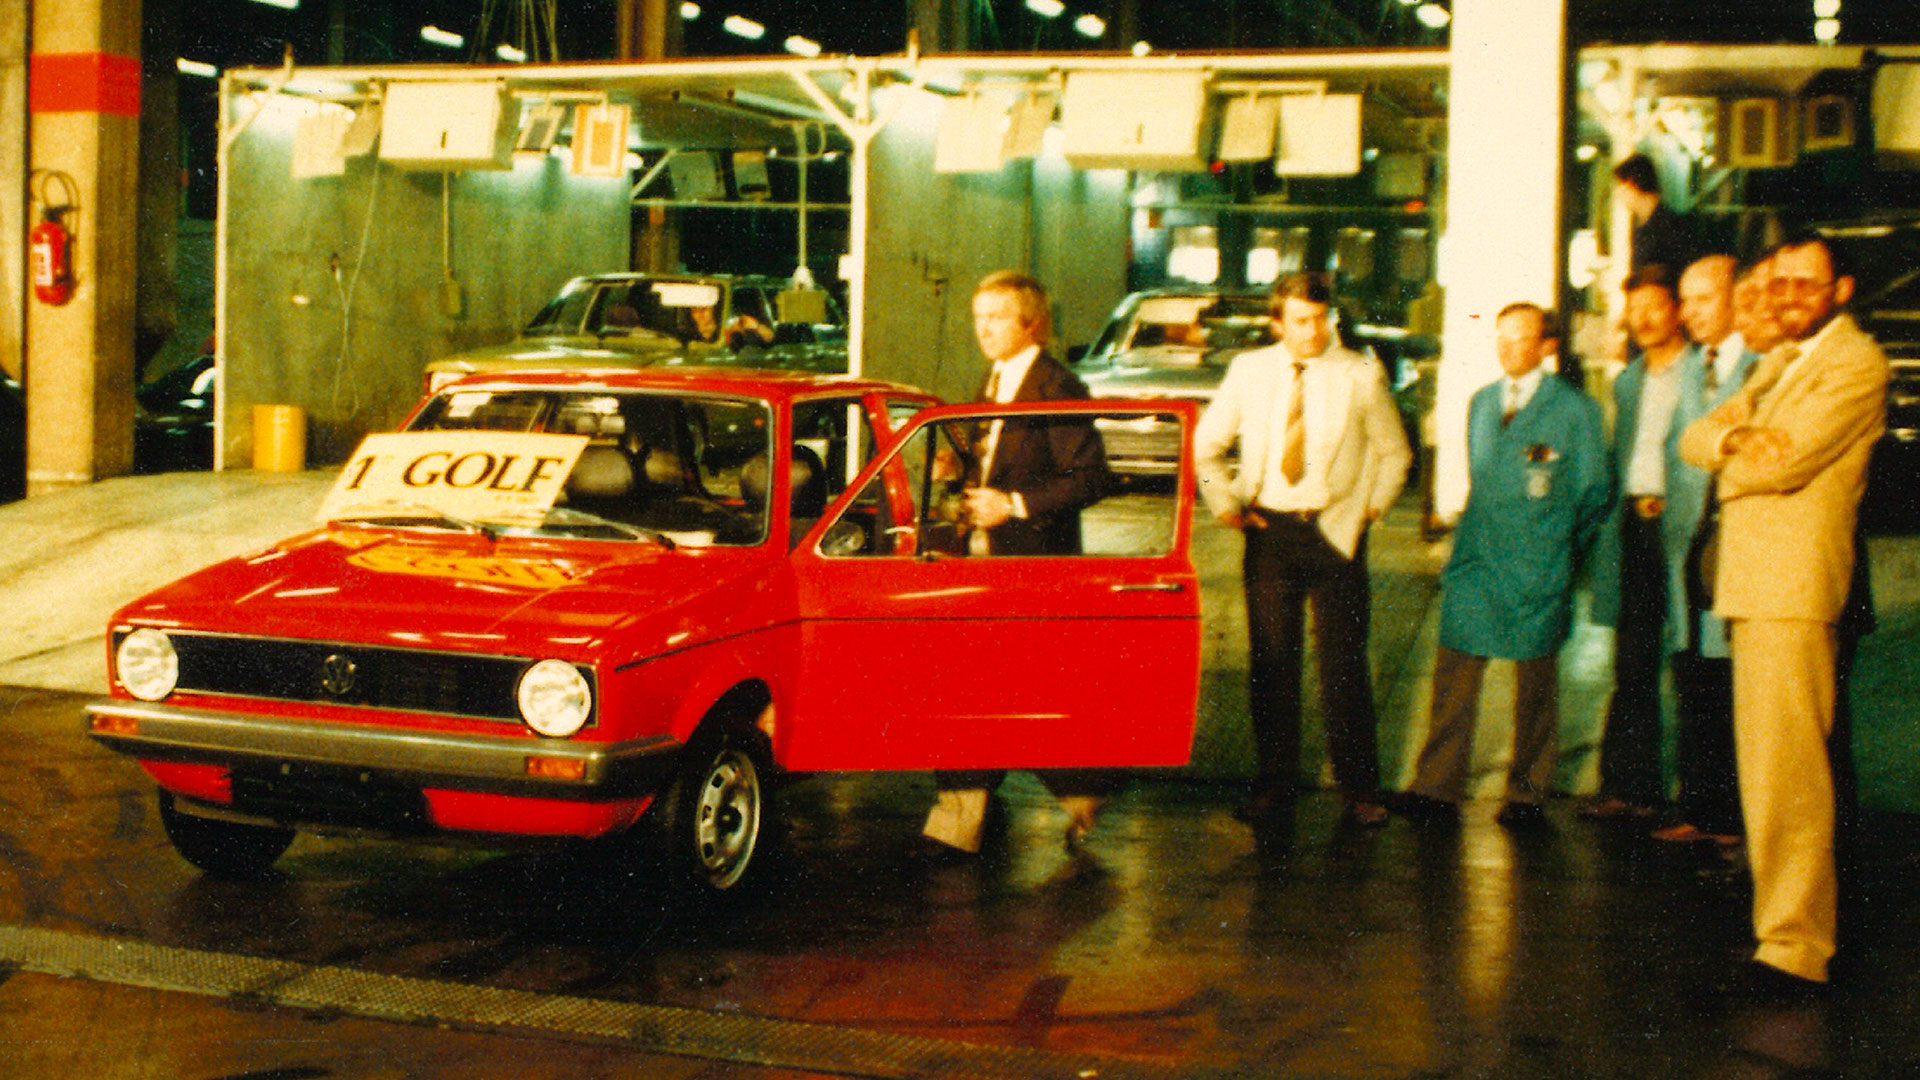 This photo from the 1970s shows the presentation of the Golf 1 to the public